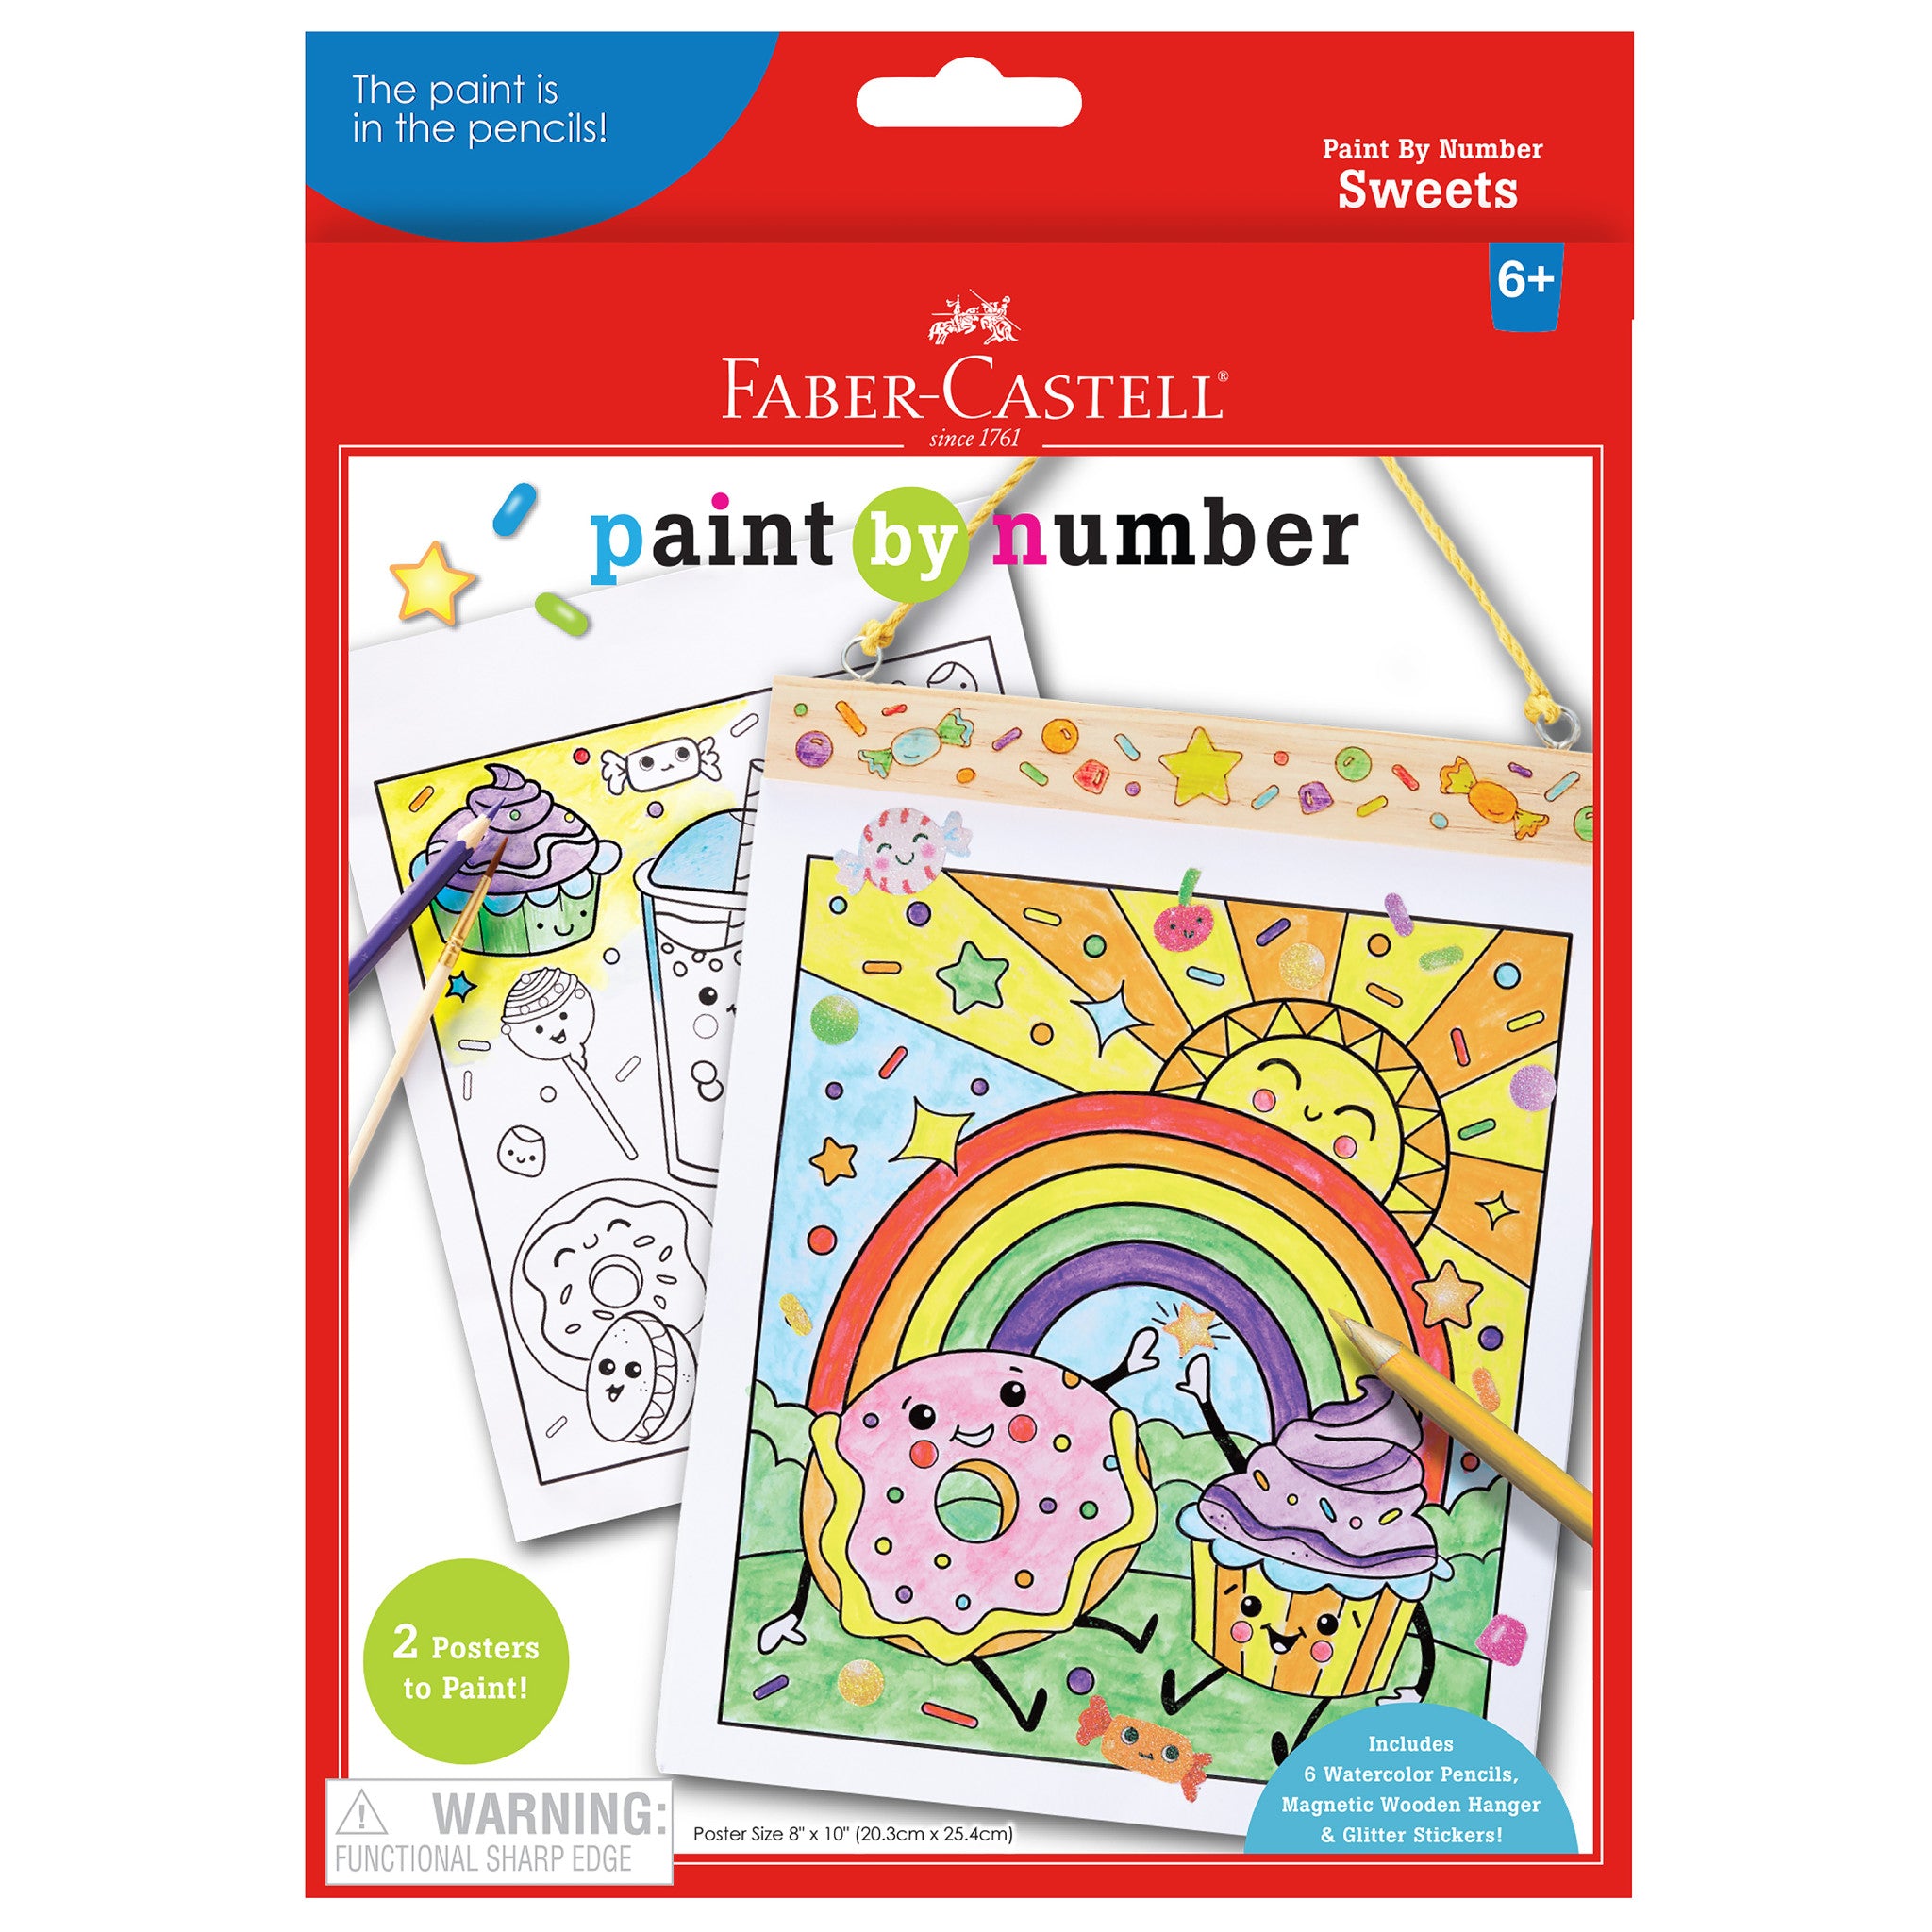 Paint by Number for Kids: Paint by Number Sweets Wall Art from  Faber-Castell – Faber-Castell USA